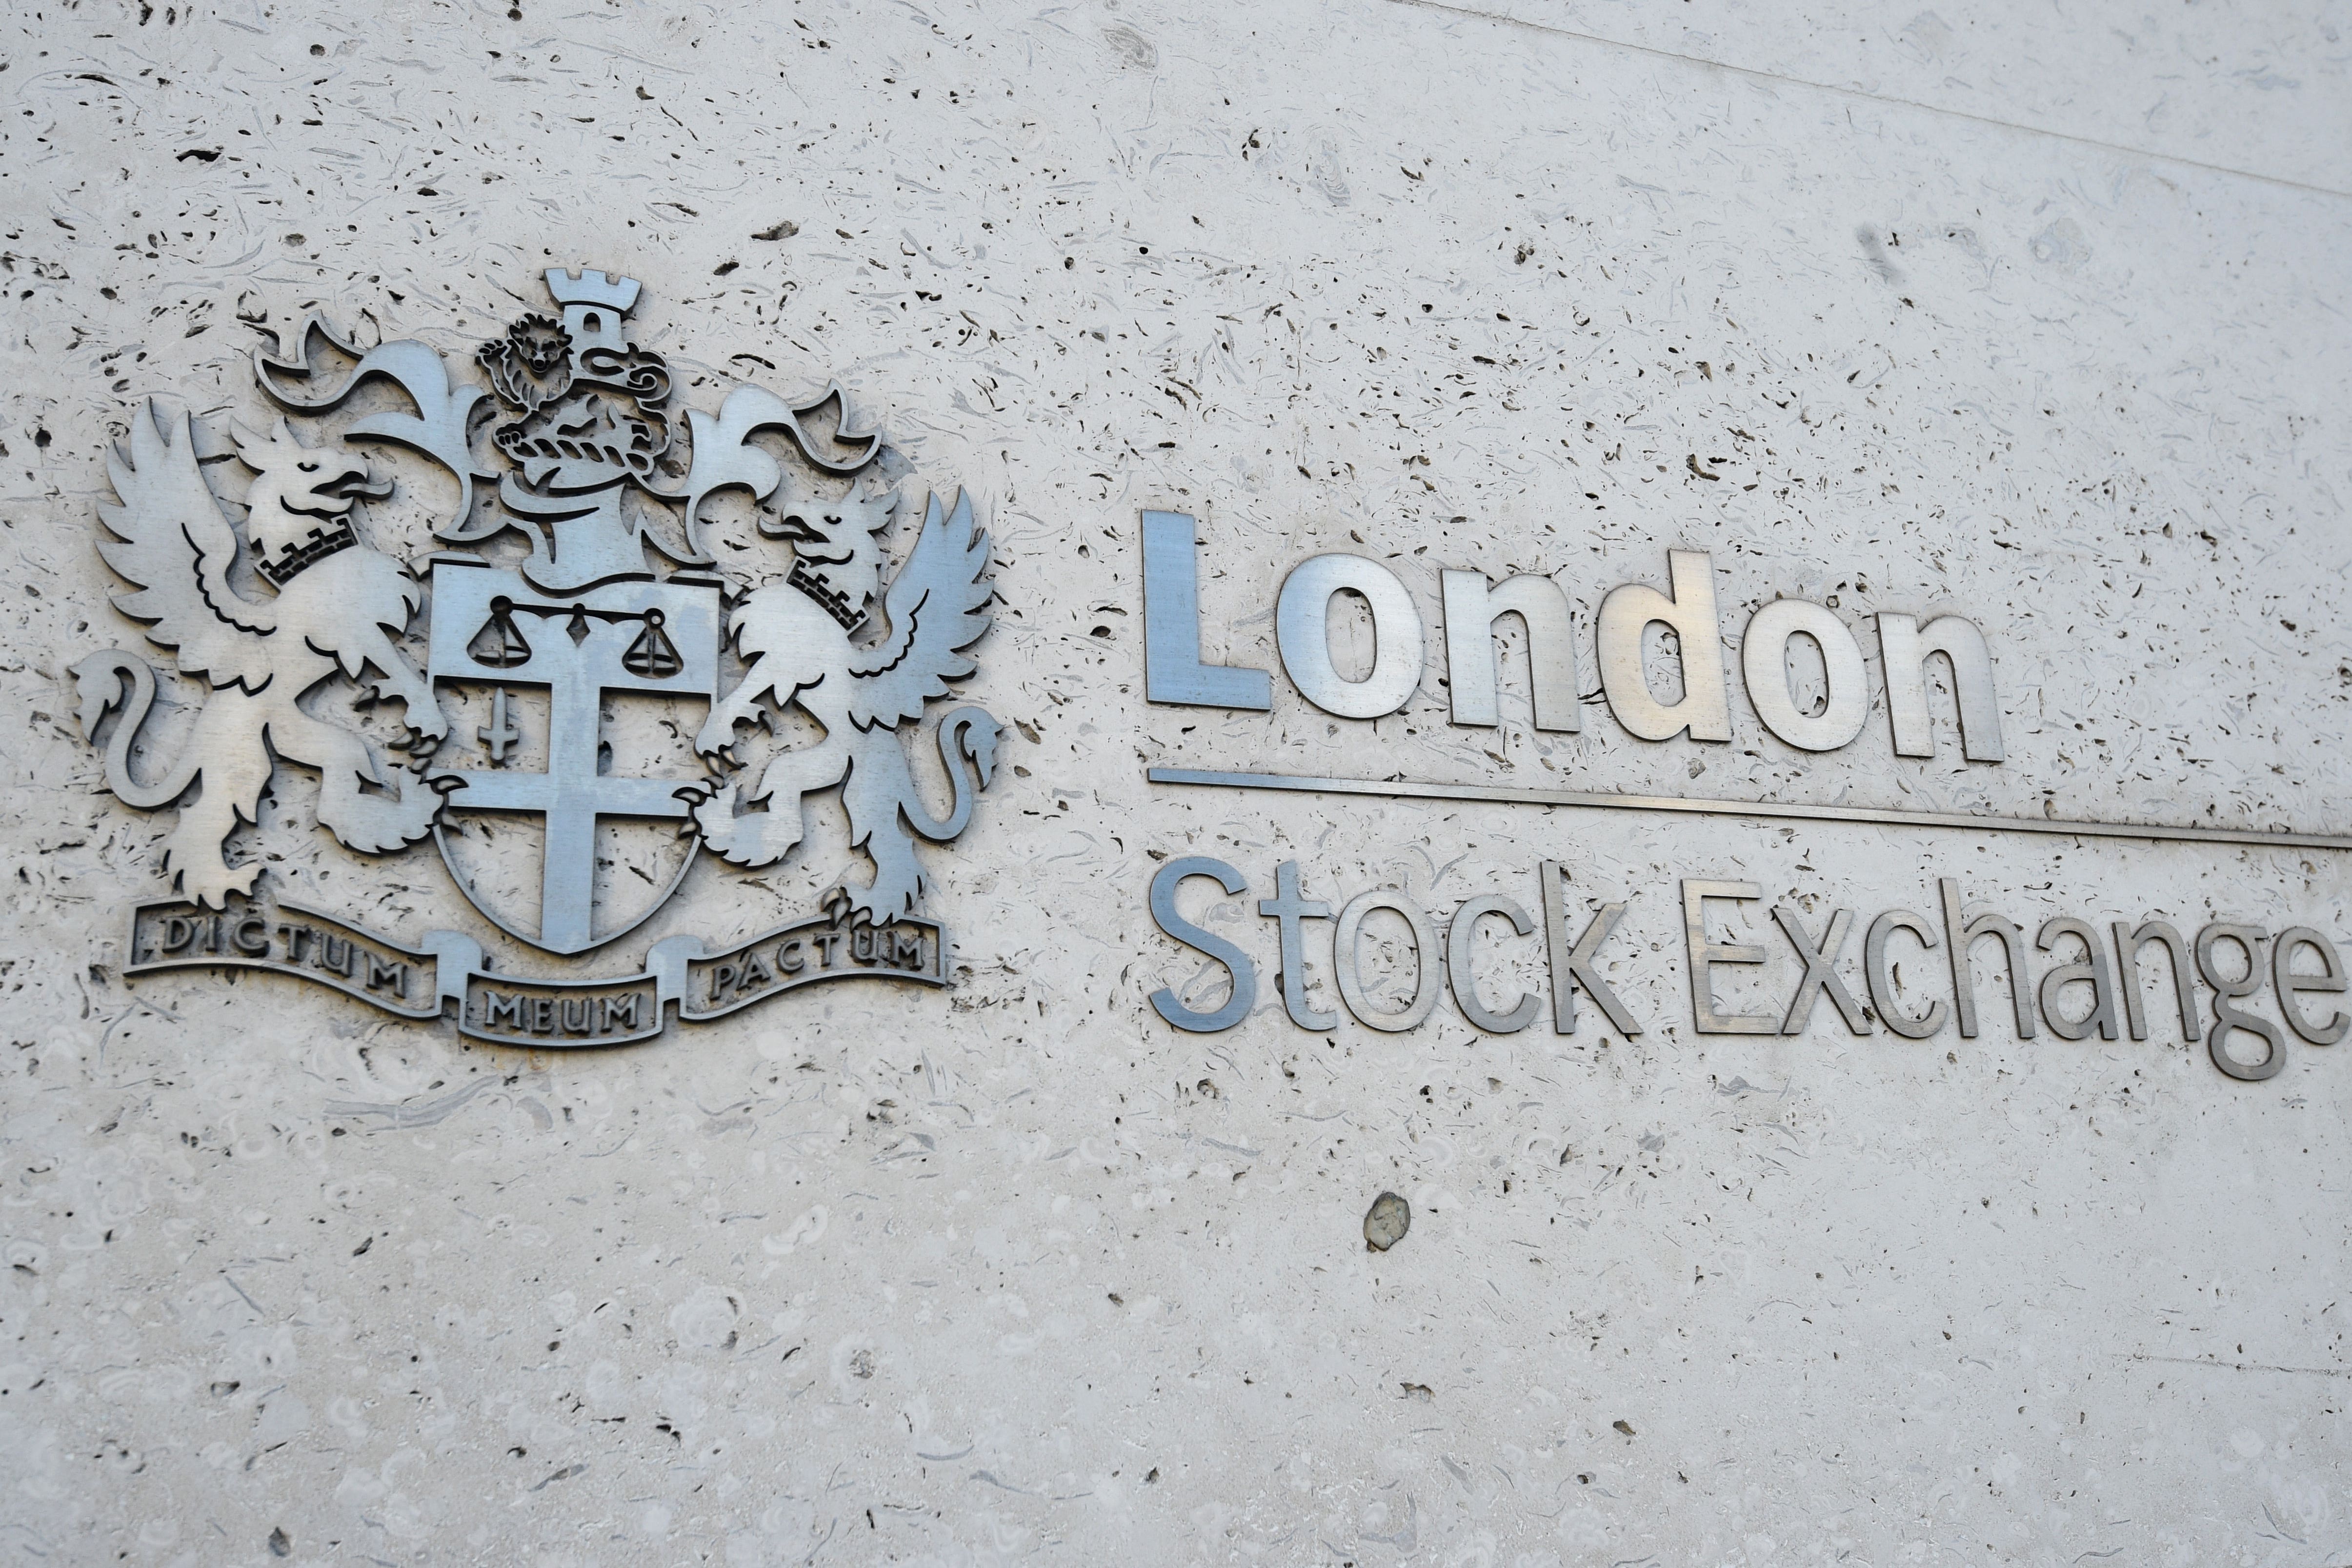 The London Stock Exchange saw trading halted on hundreds of stocks on Tuesday after another outage on the stock market (PA)